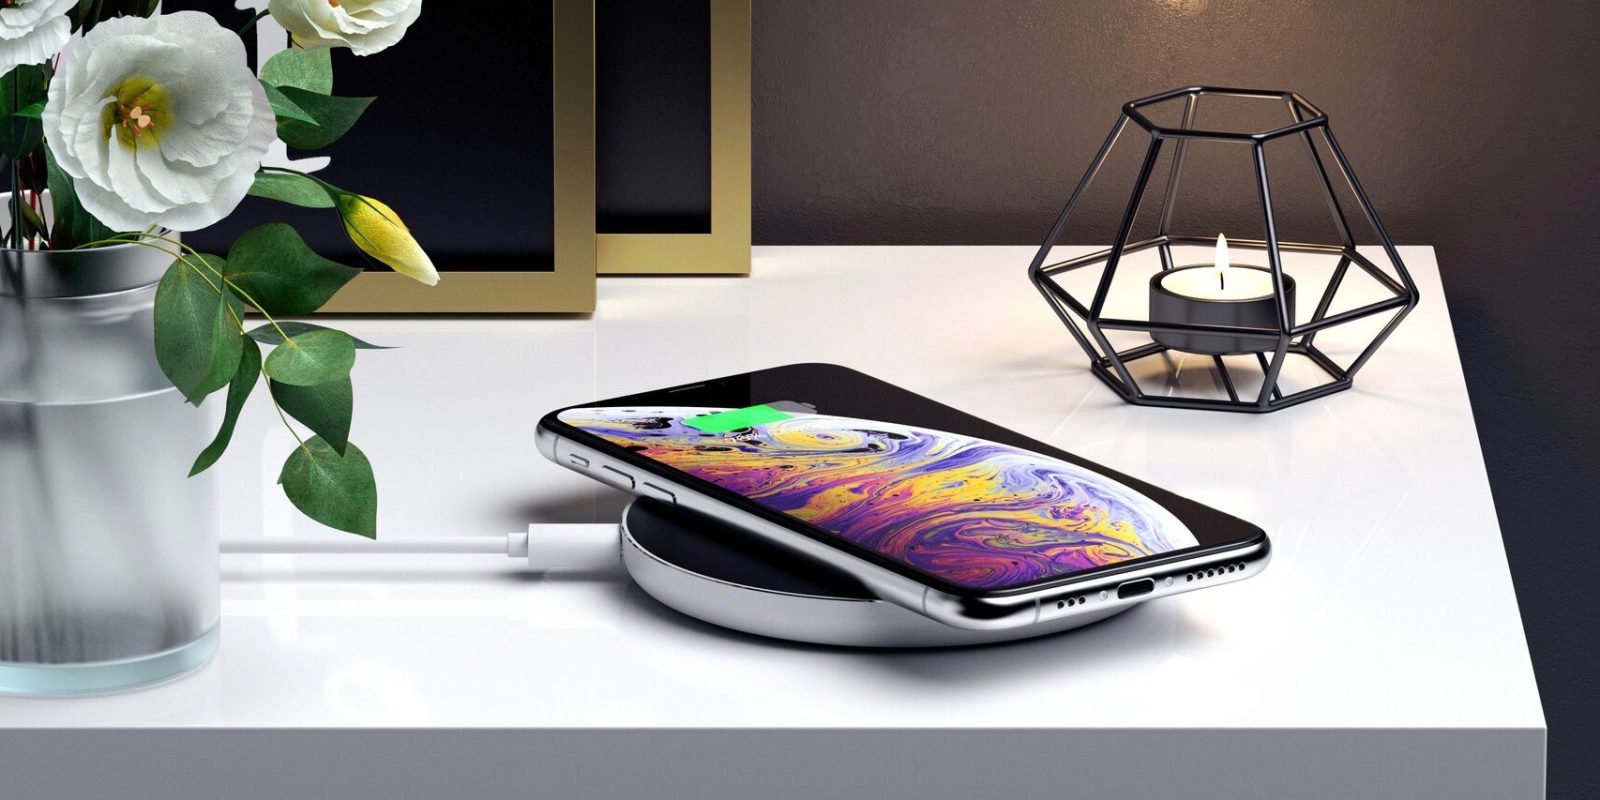 Satechi launches sleek Qi-certified Aluminum USB-C Wireless charger for iPhone